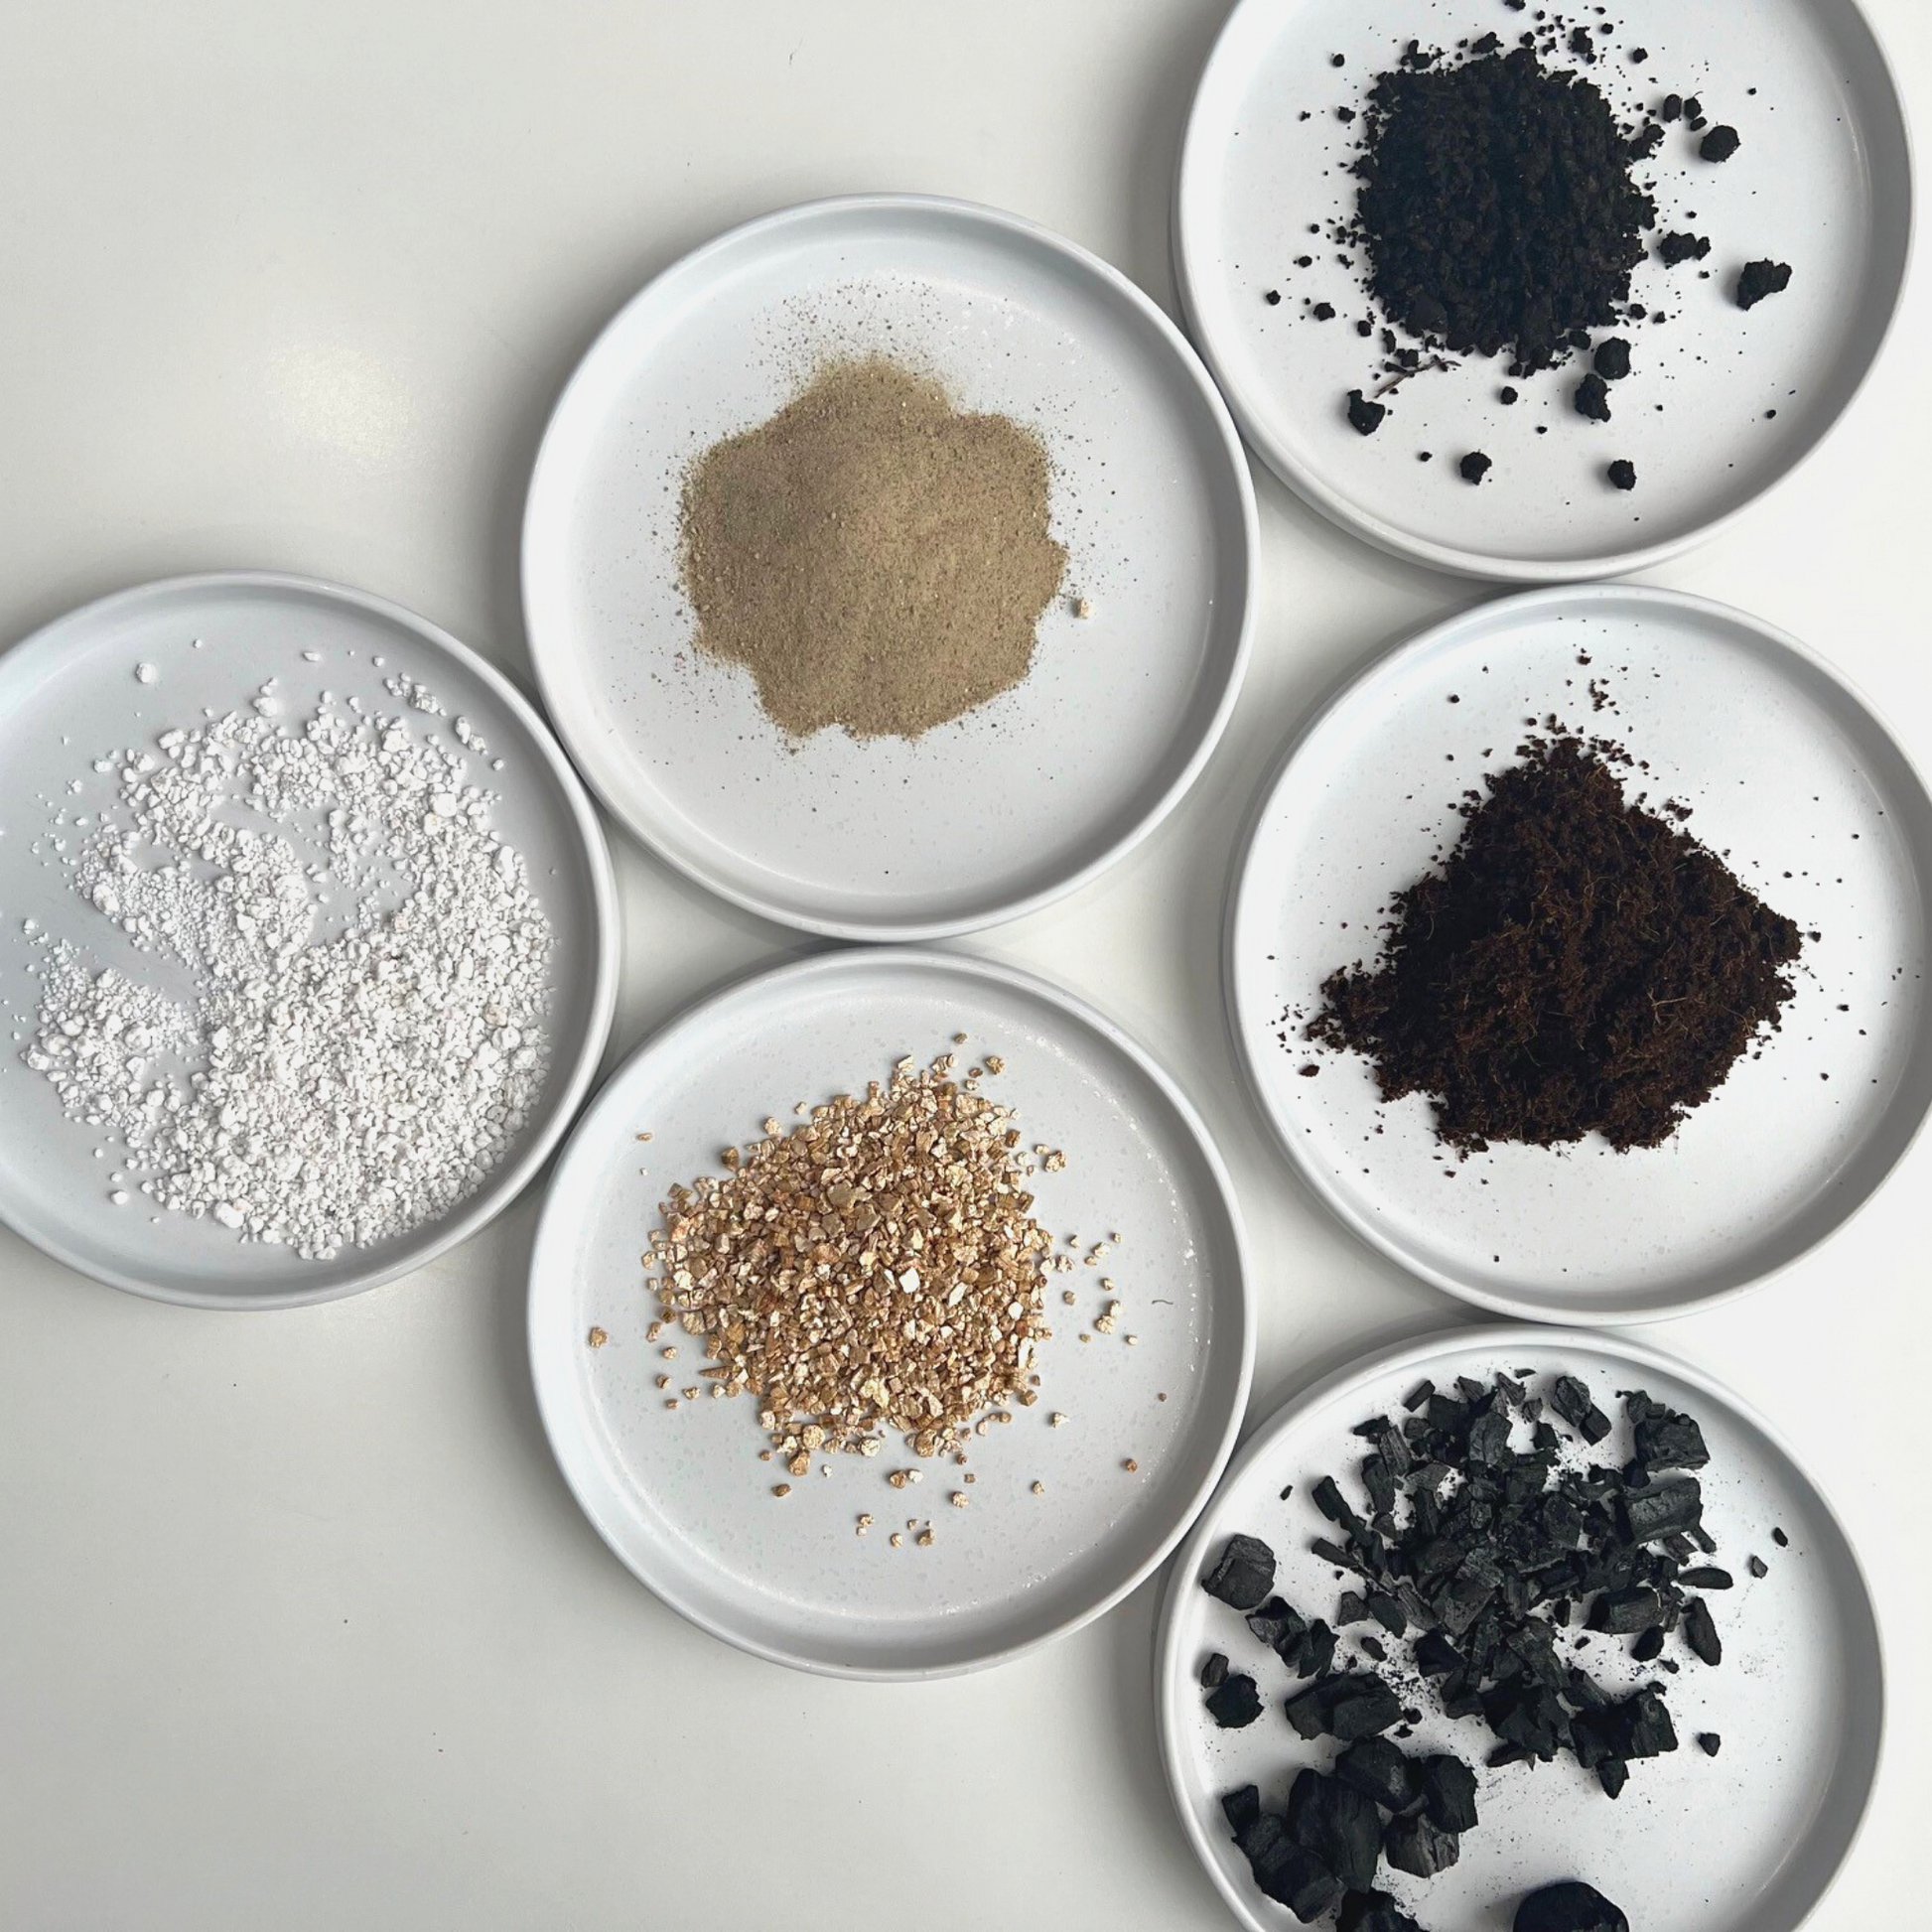 A ingredient makeup of Birdy's Plants Premium Fern Soil Mix including sand, activated horticultural charcoal, vermiculite, coarse perlite, worm castings, and coco coir.